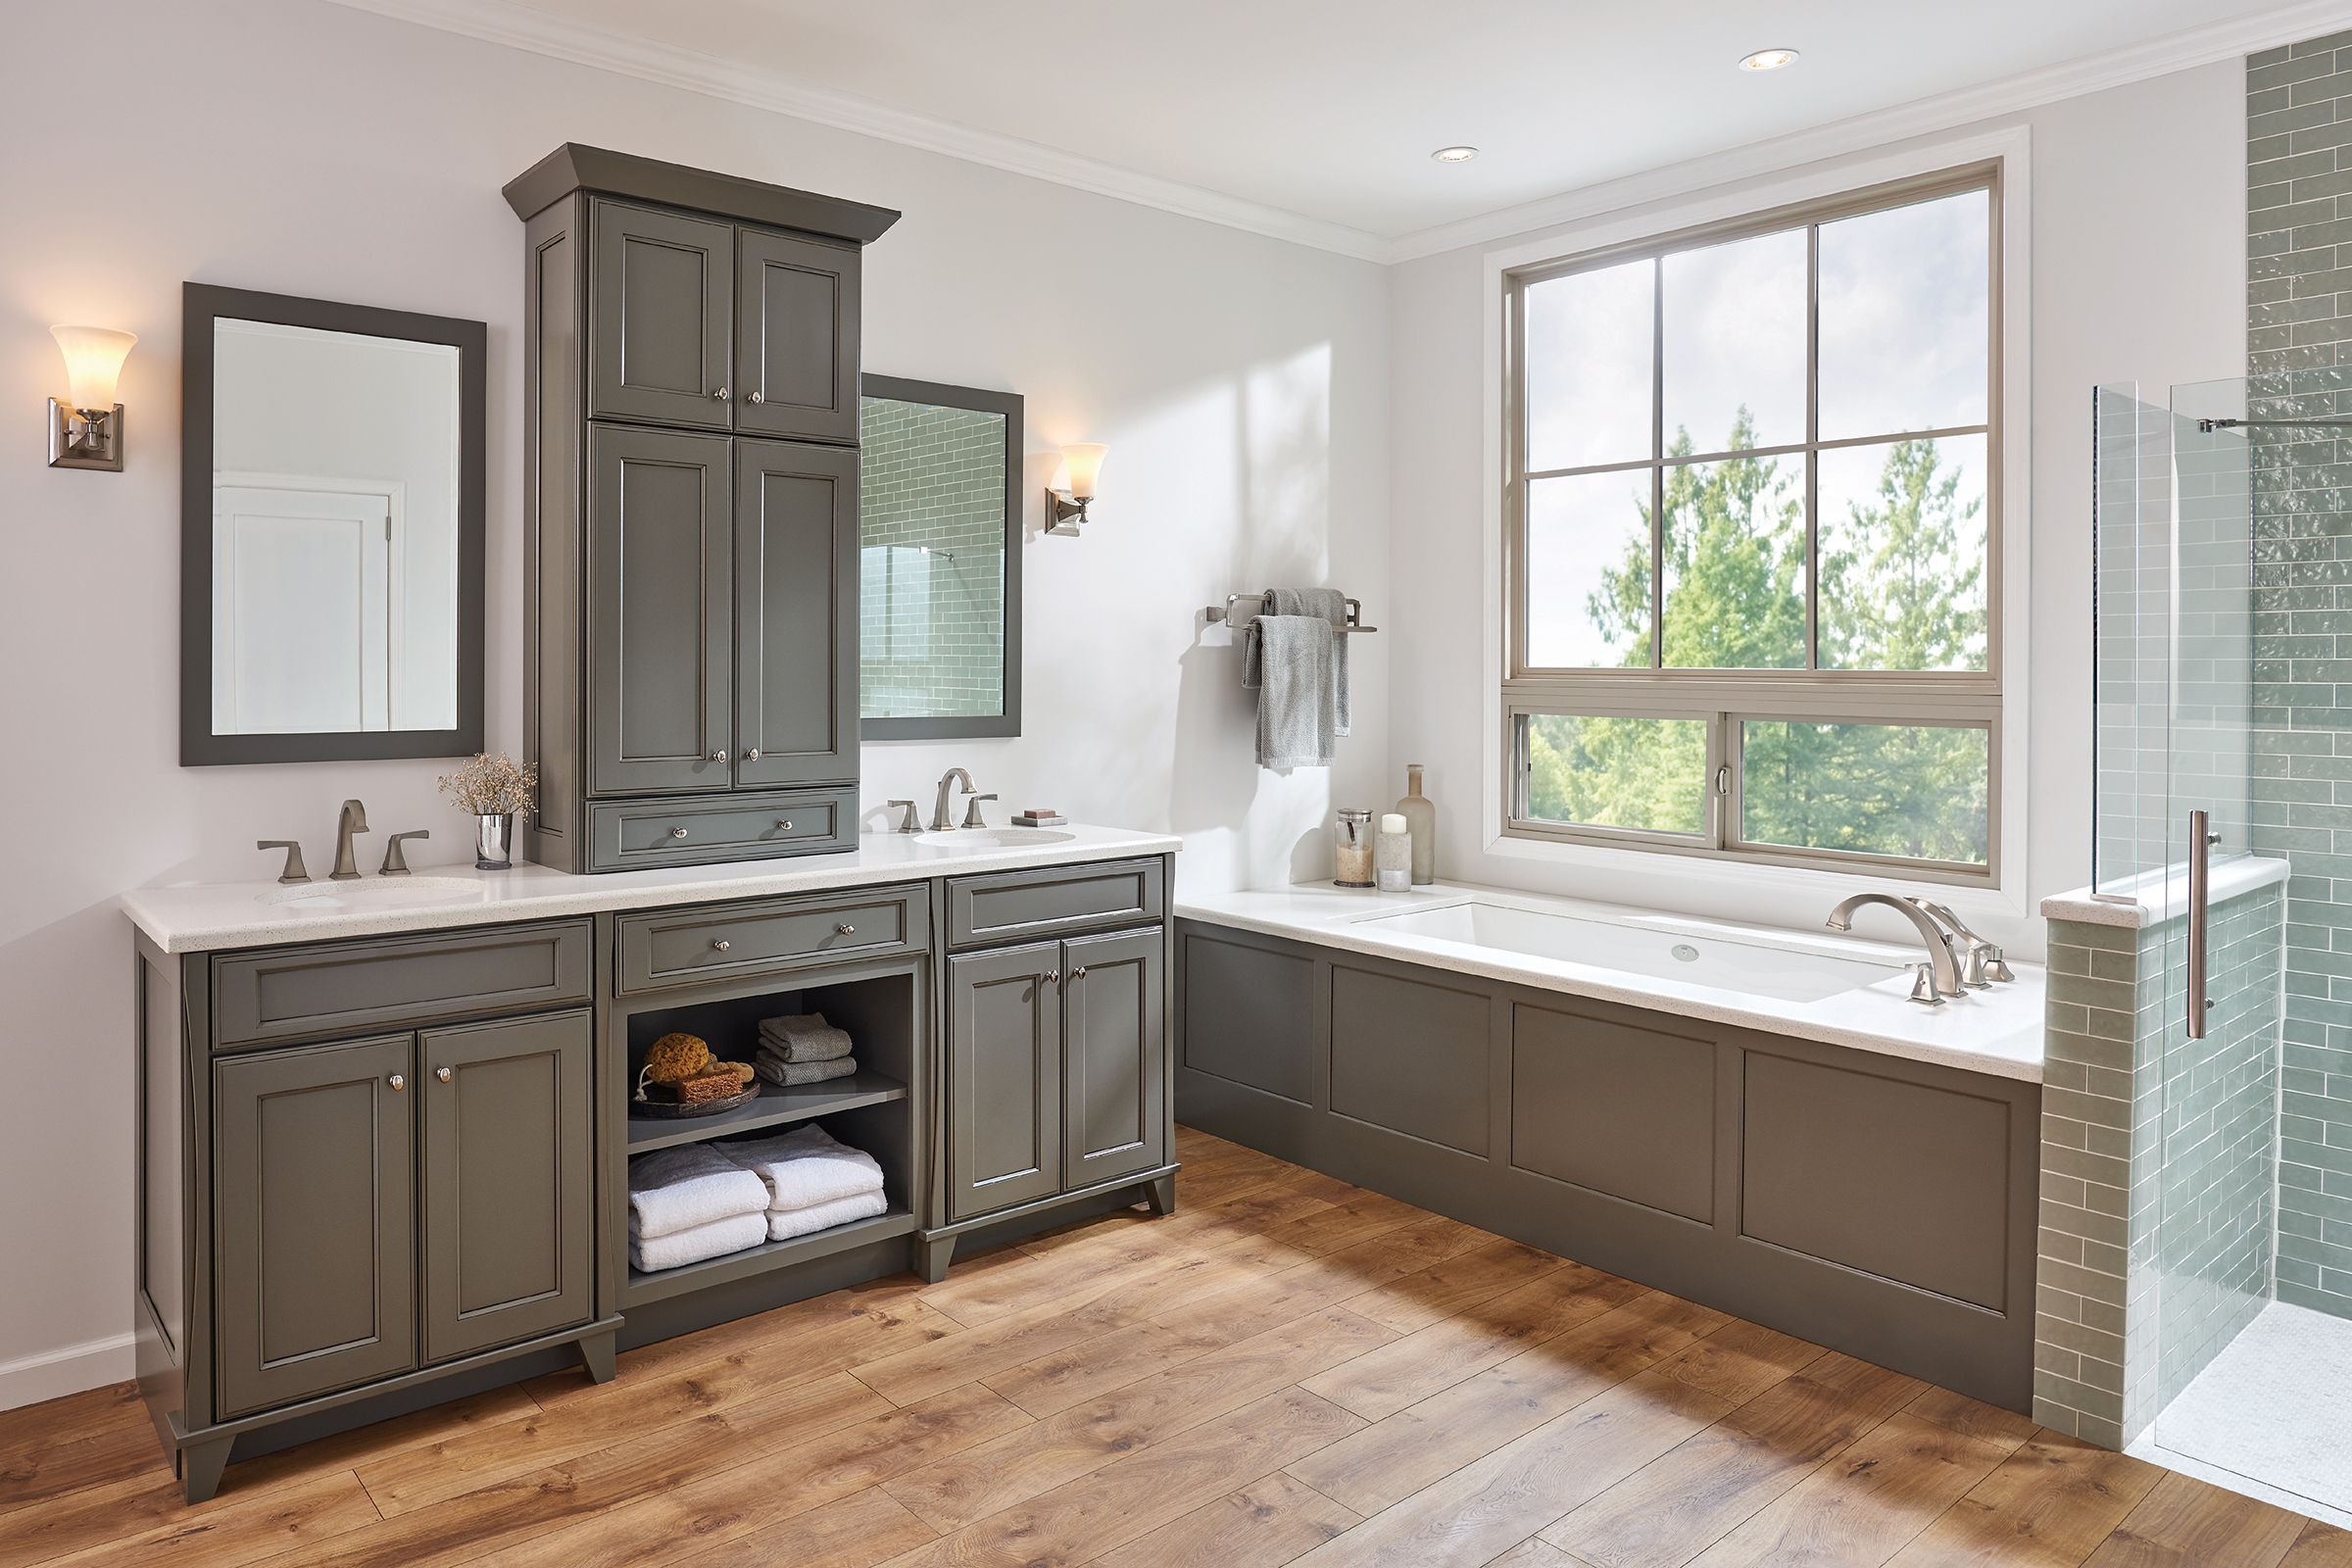 Airy bathroom with Roman tub, separate shower and KraftMaid double bathroom vanity with tall cabinet in Greyloft painted finish